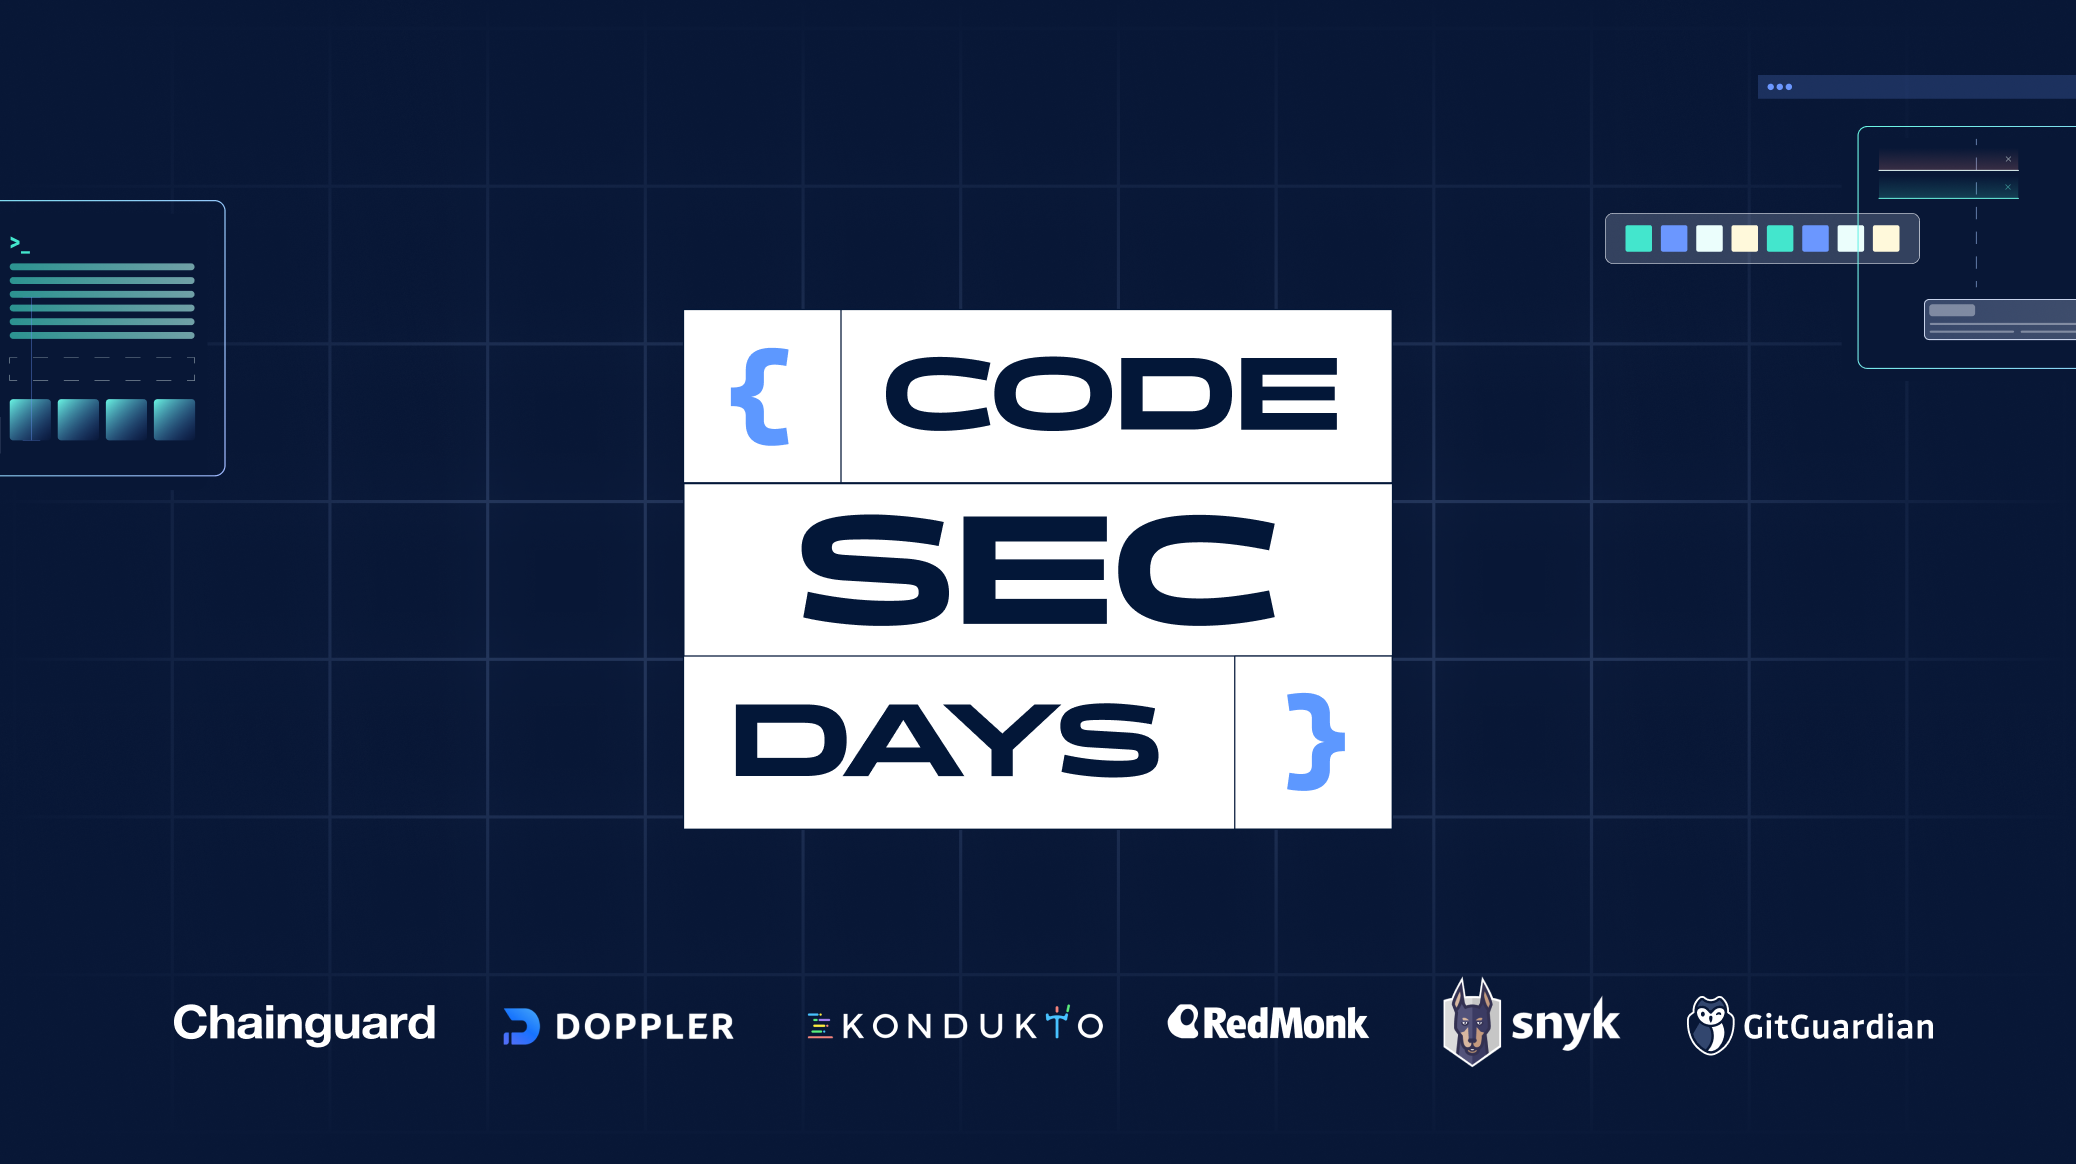 CodeSecDays brings security leaders together to build a world without software security issues